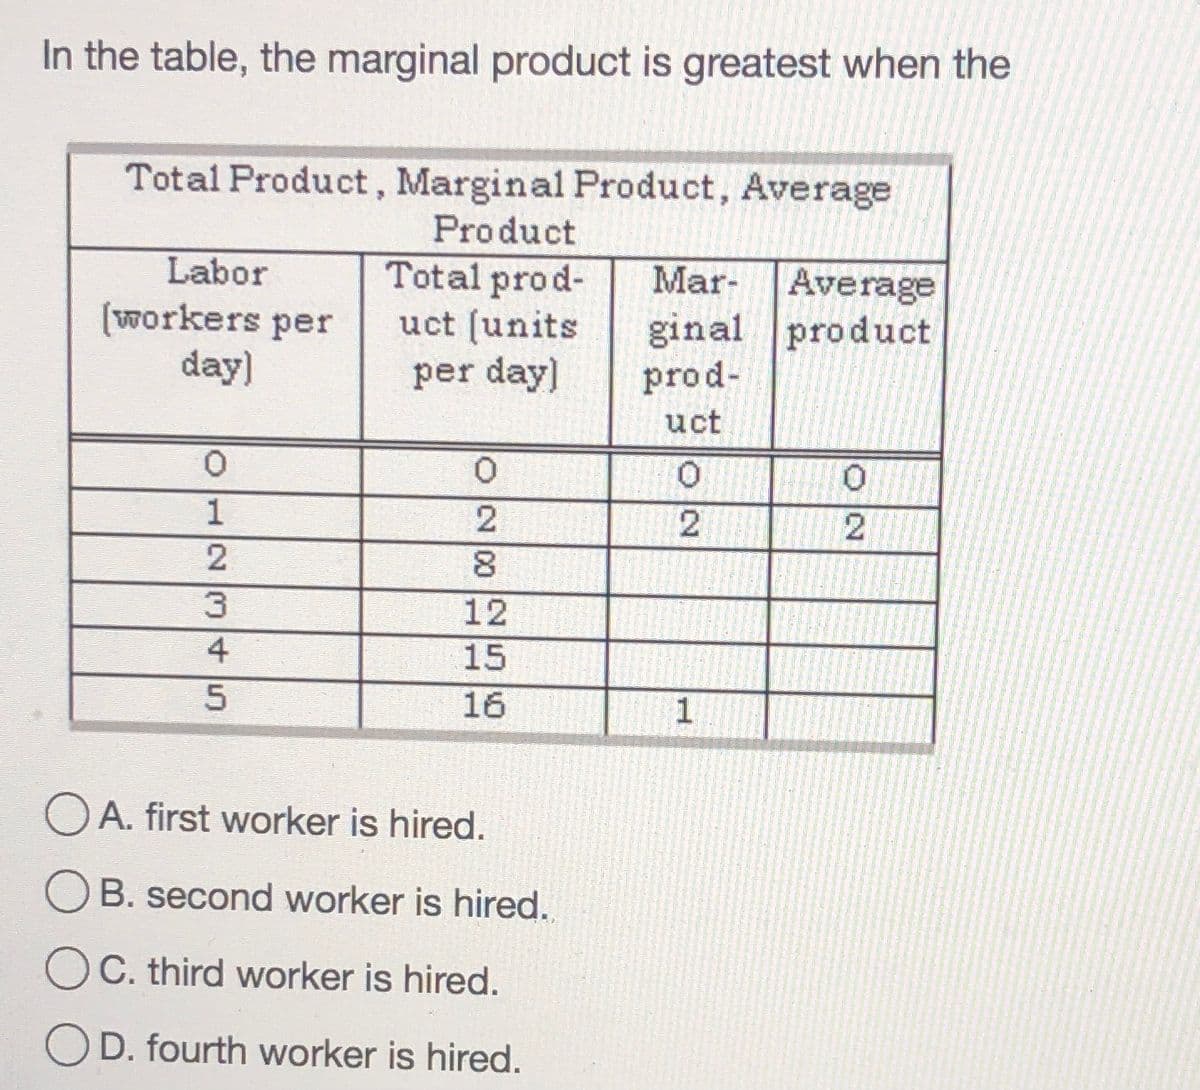 In the table, the marginal product is greatest when the
Total Product, Marginal Product, Average
Product
Labor
(workers per
day)
Total prod-
uct (units
per day]
Mar- Average
ginal product
prod-
uct
3
12
15
O A. first worker is hired.
B. second worker is hired.
OC. third worker is hired.
D. fourth worker is hired.
ON 00 N n6
O12M+ 5
